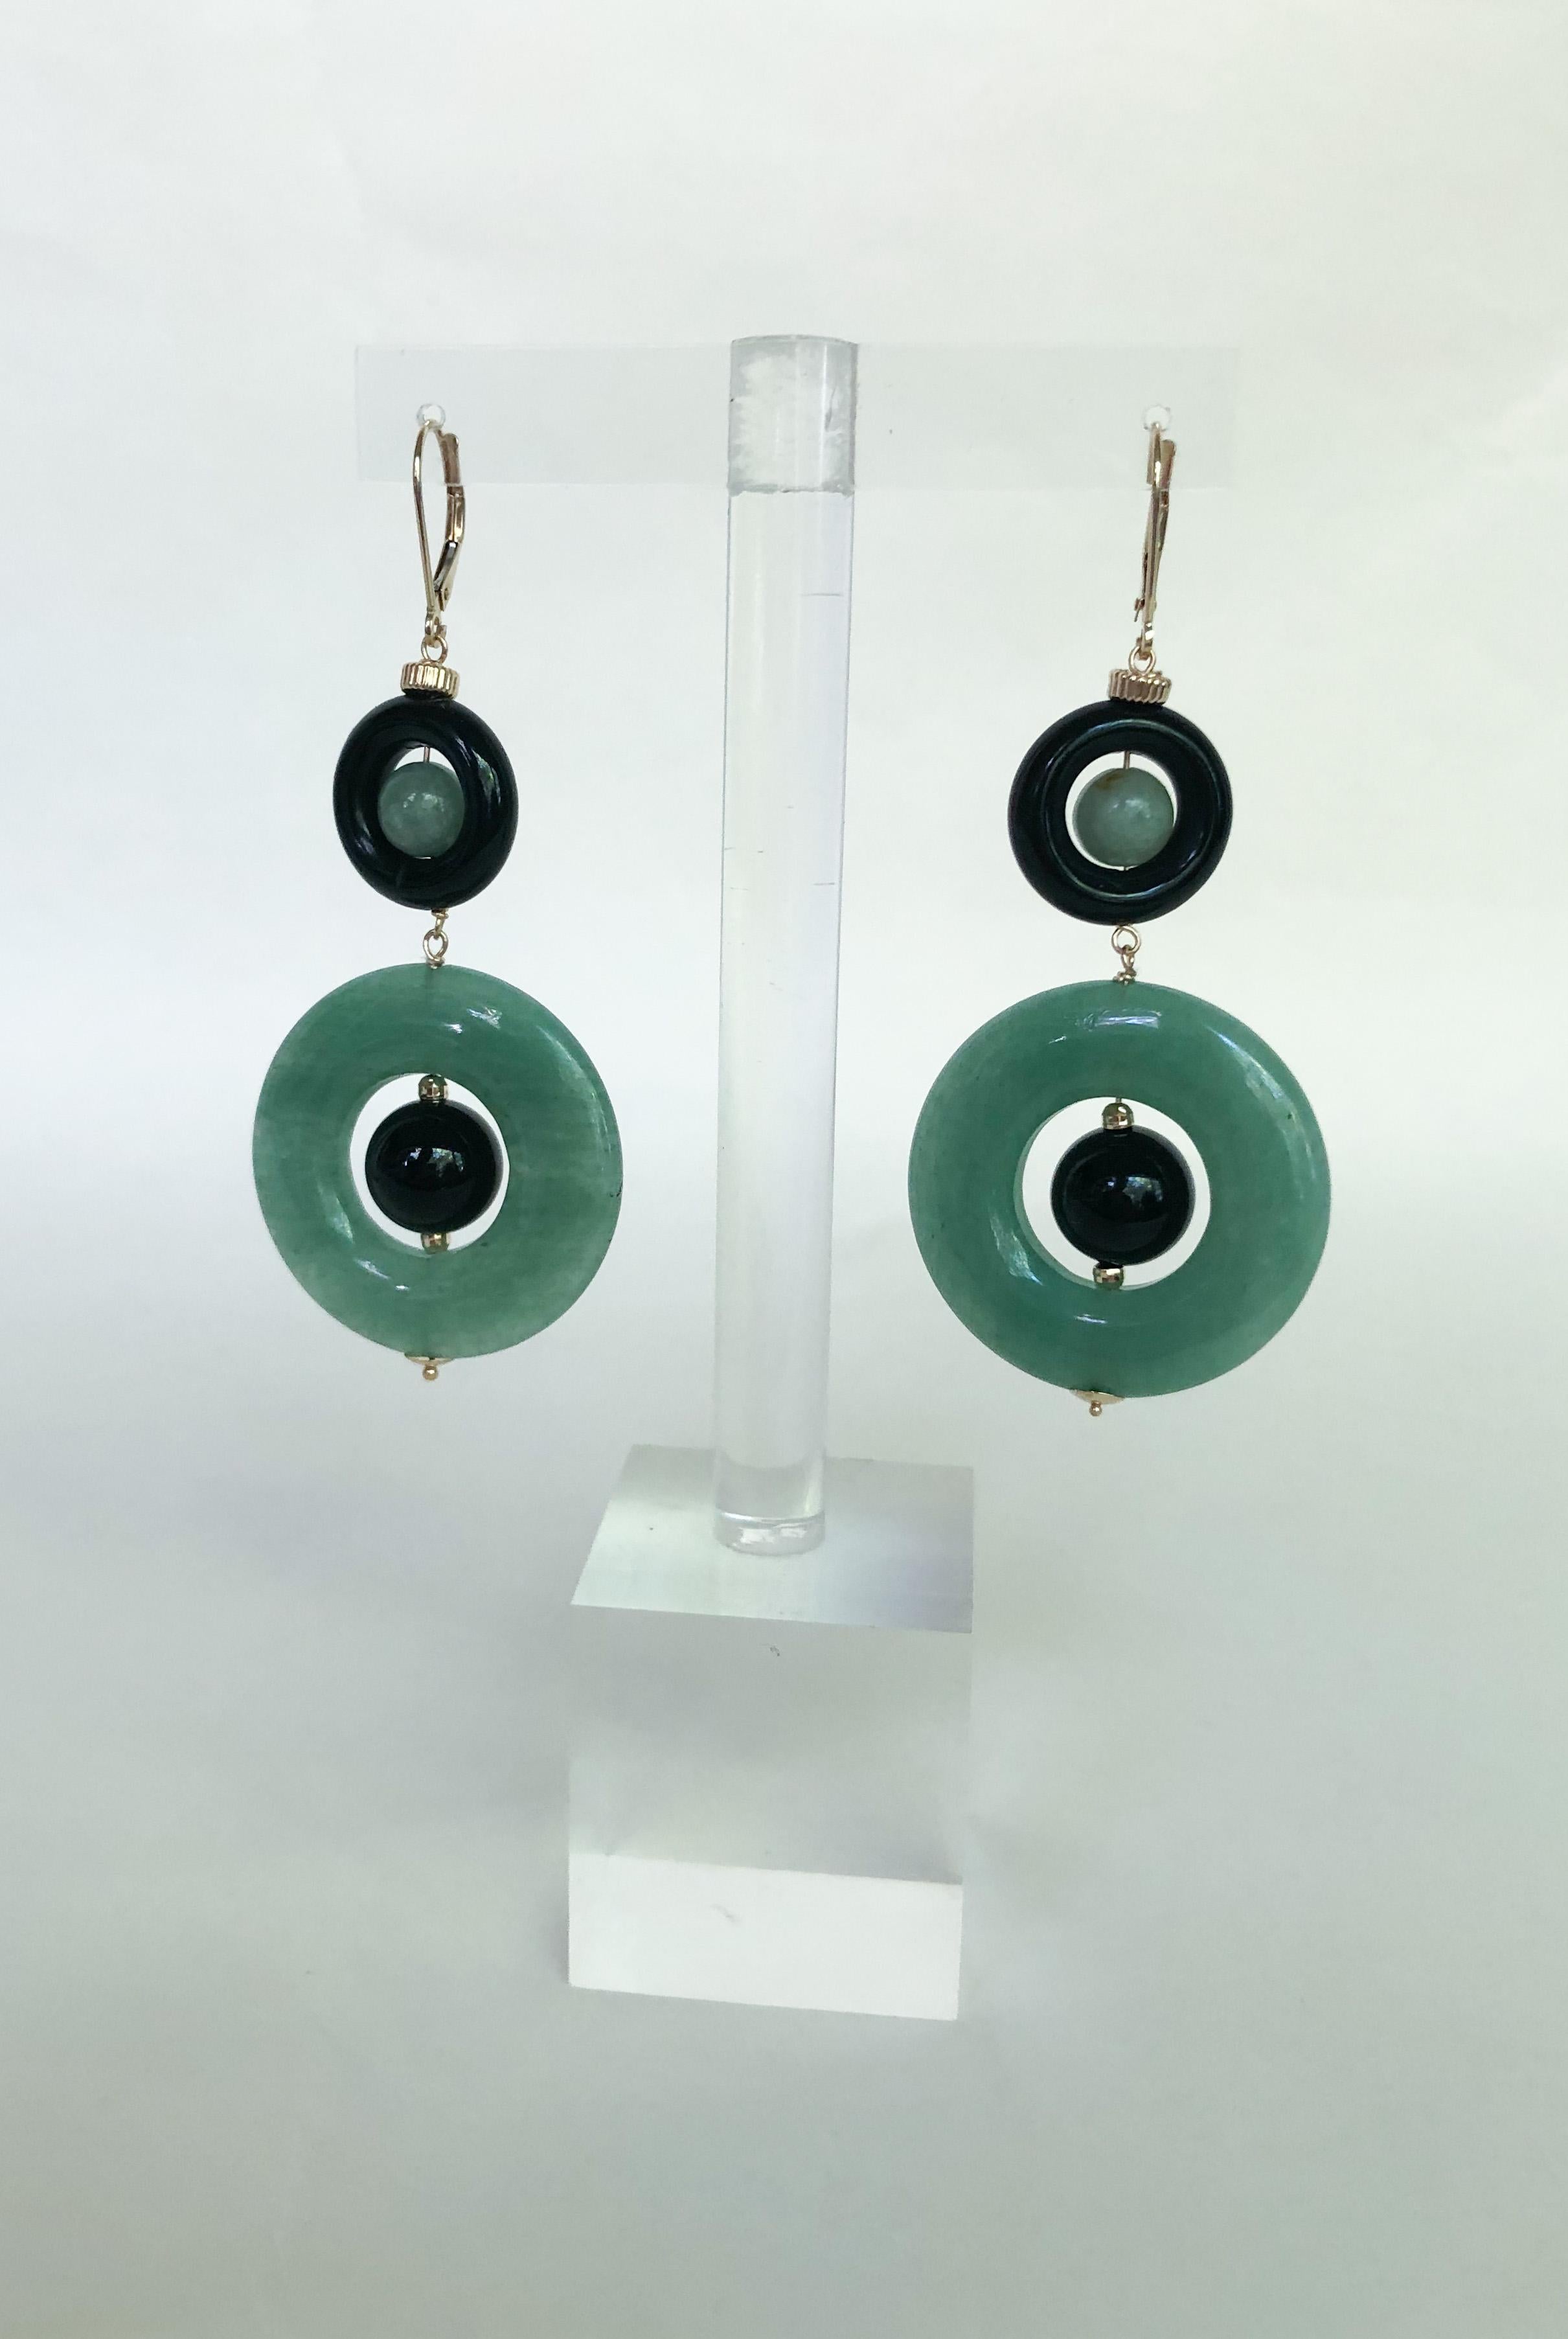 These elegant earrings are made with a jade ring, onyx ring, onyx circular bead, and jade circular bead. The onyx and jade contrast beautifully with each other, and gives the earrings a dramatic flare. The earrings are about 2 inches long, and